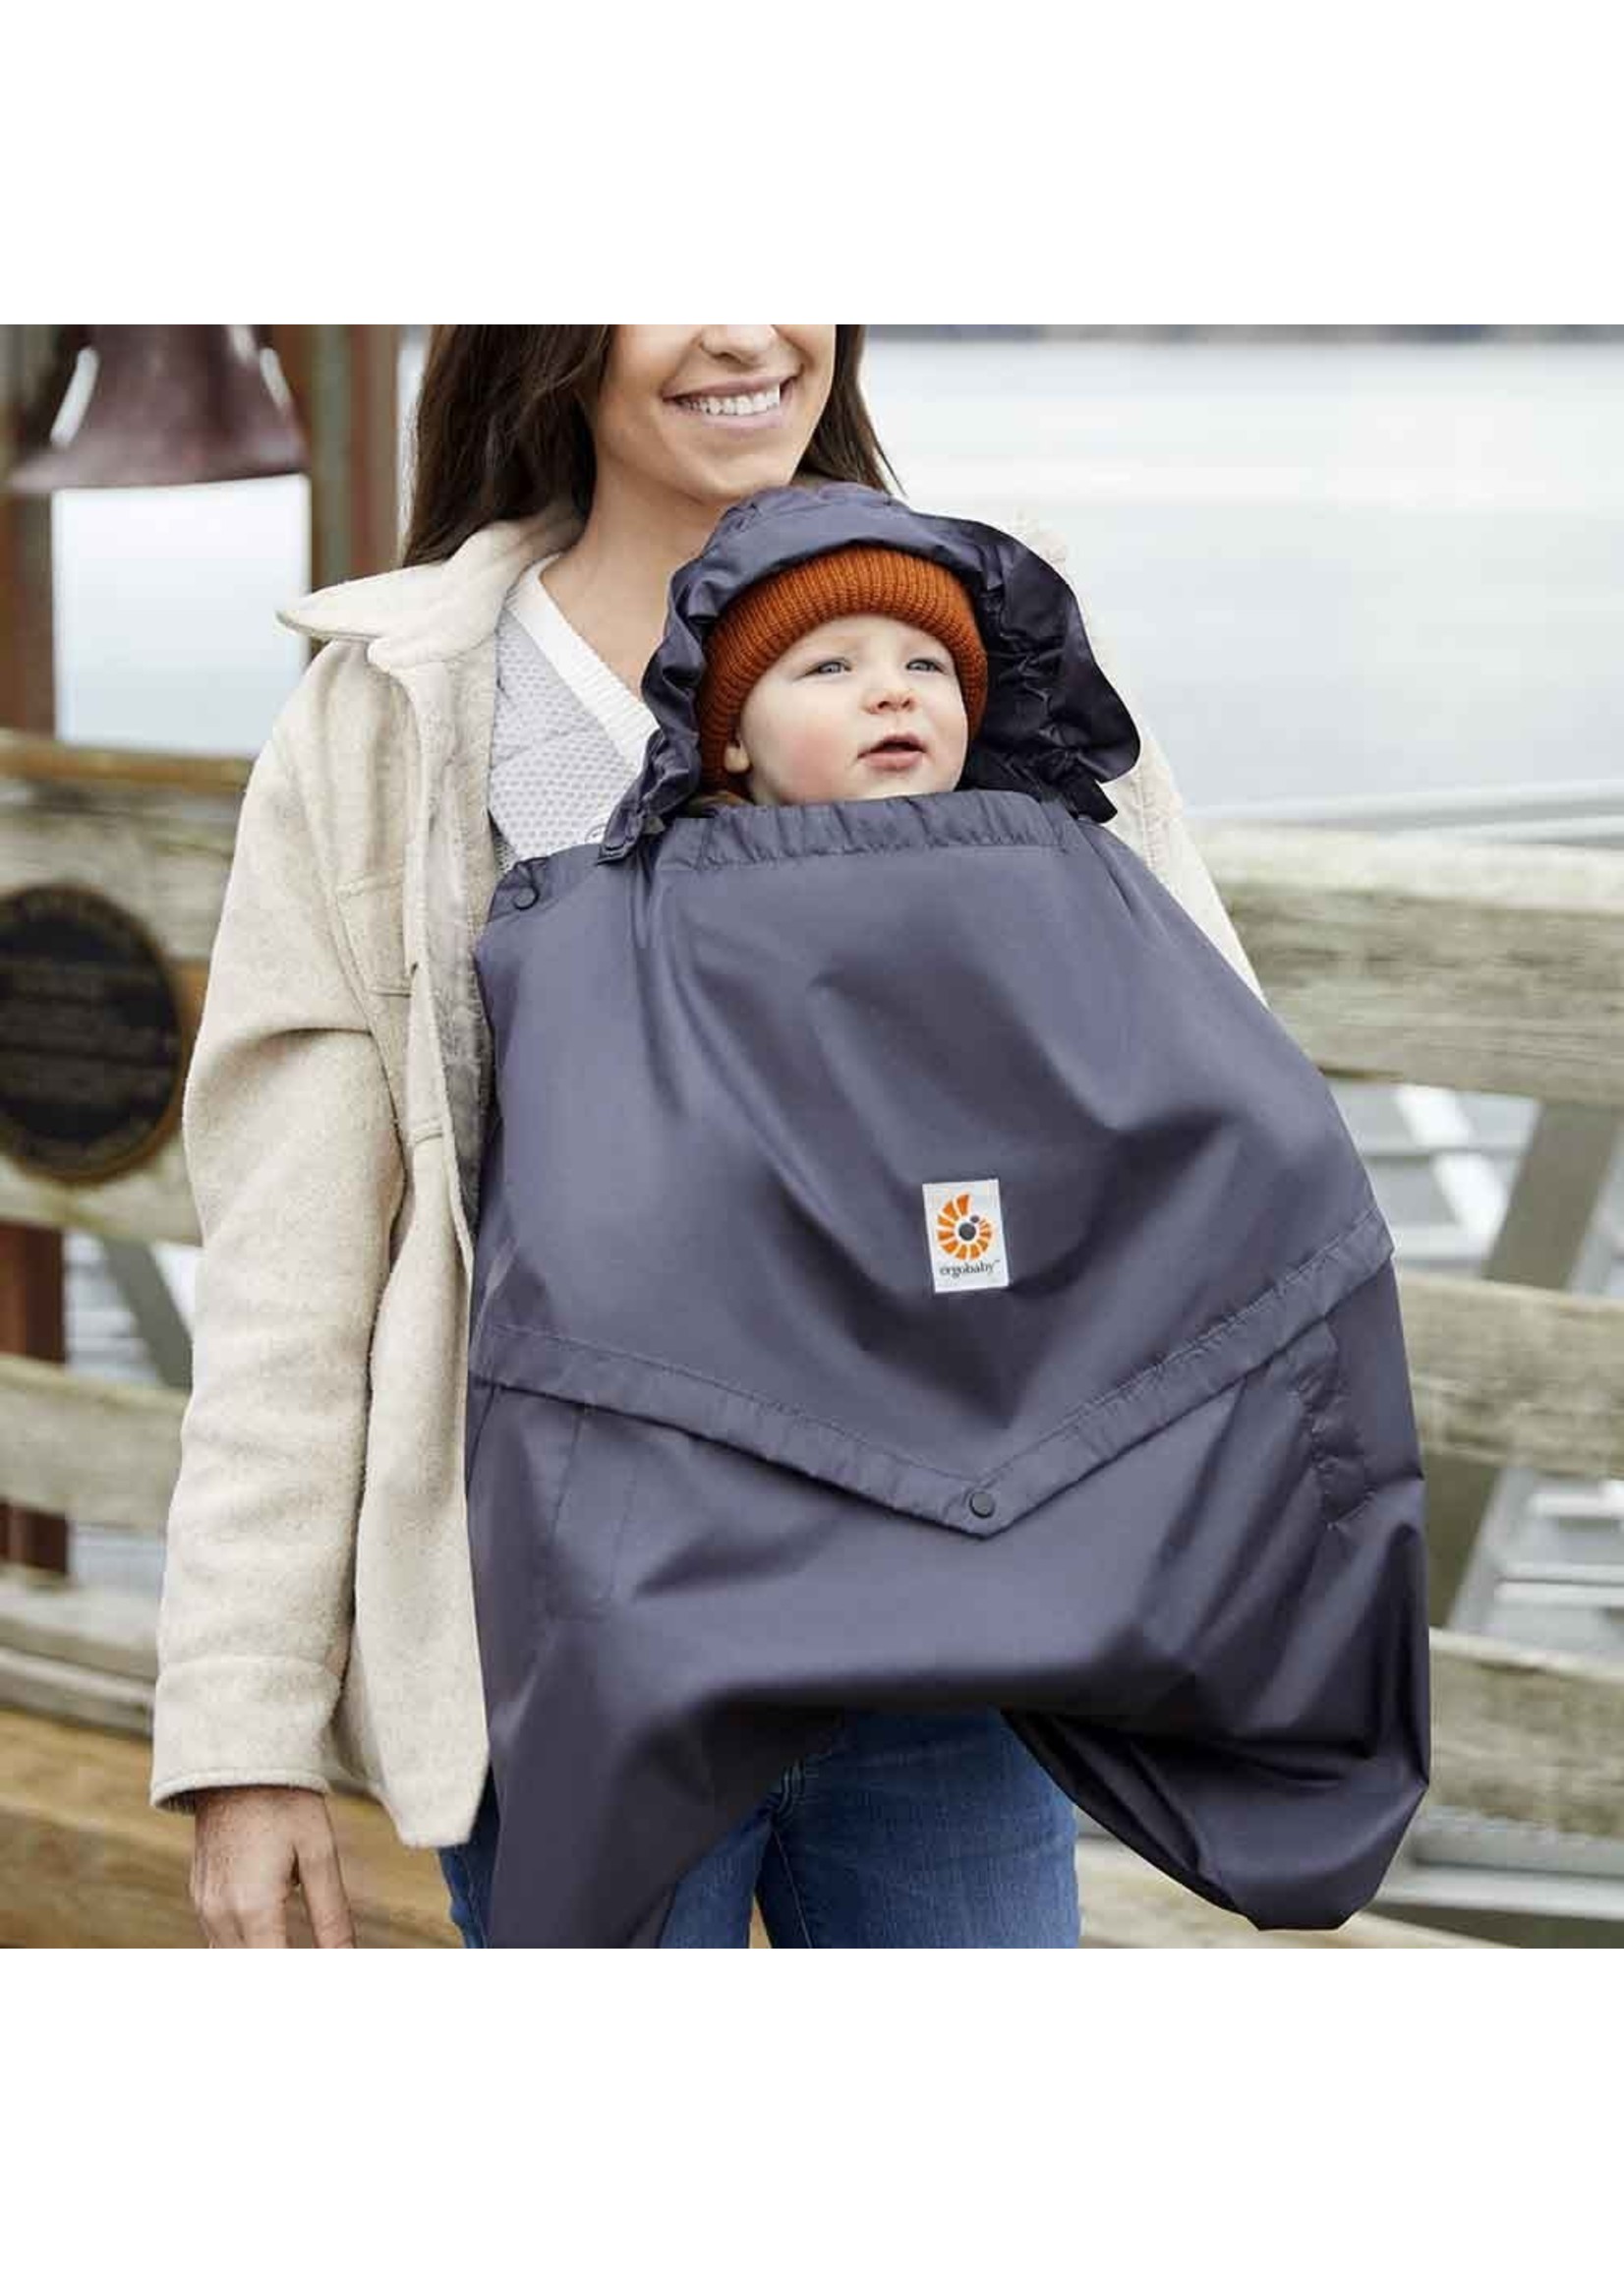 Ergobaby Rain and Wind Carrier Cover